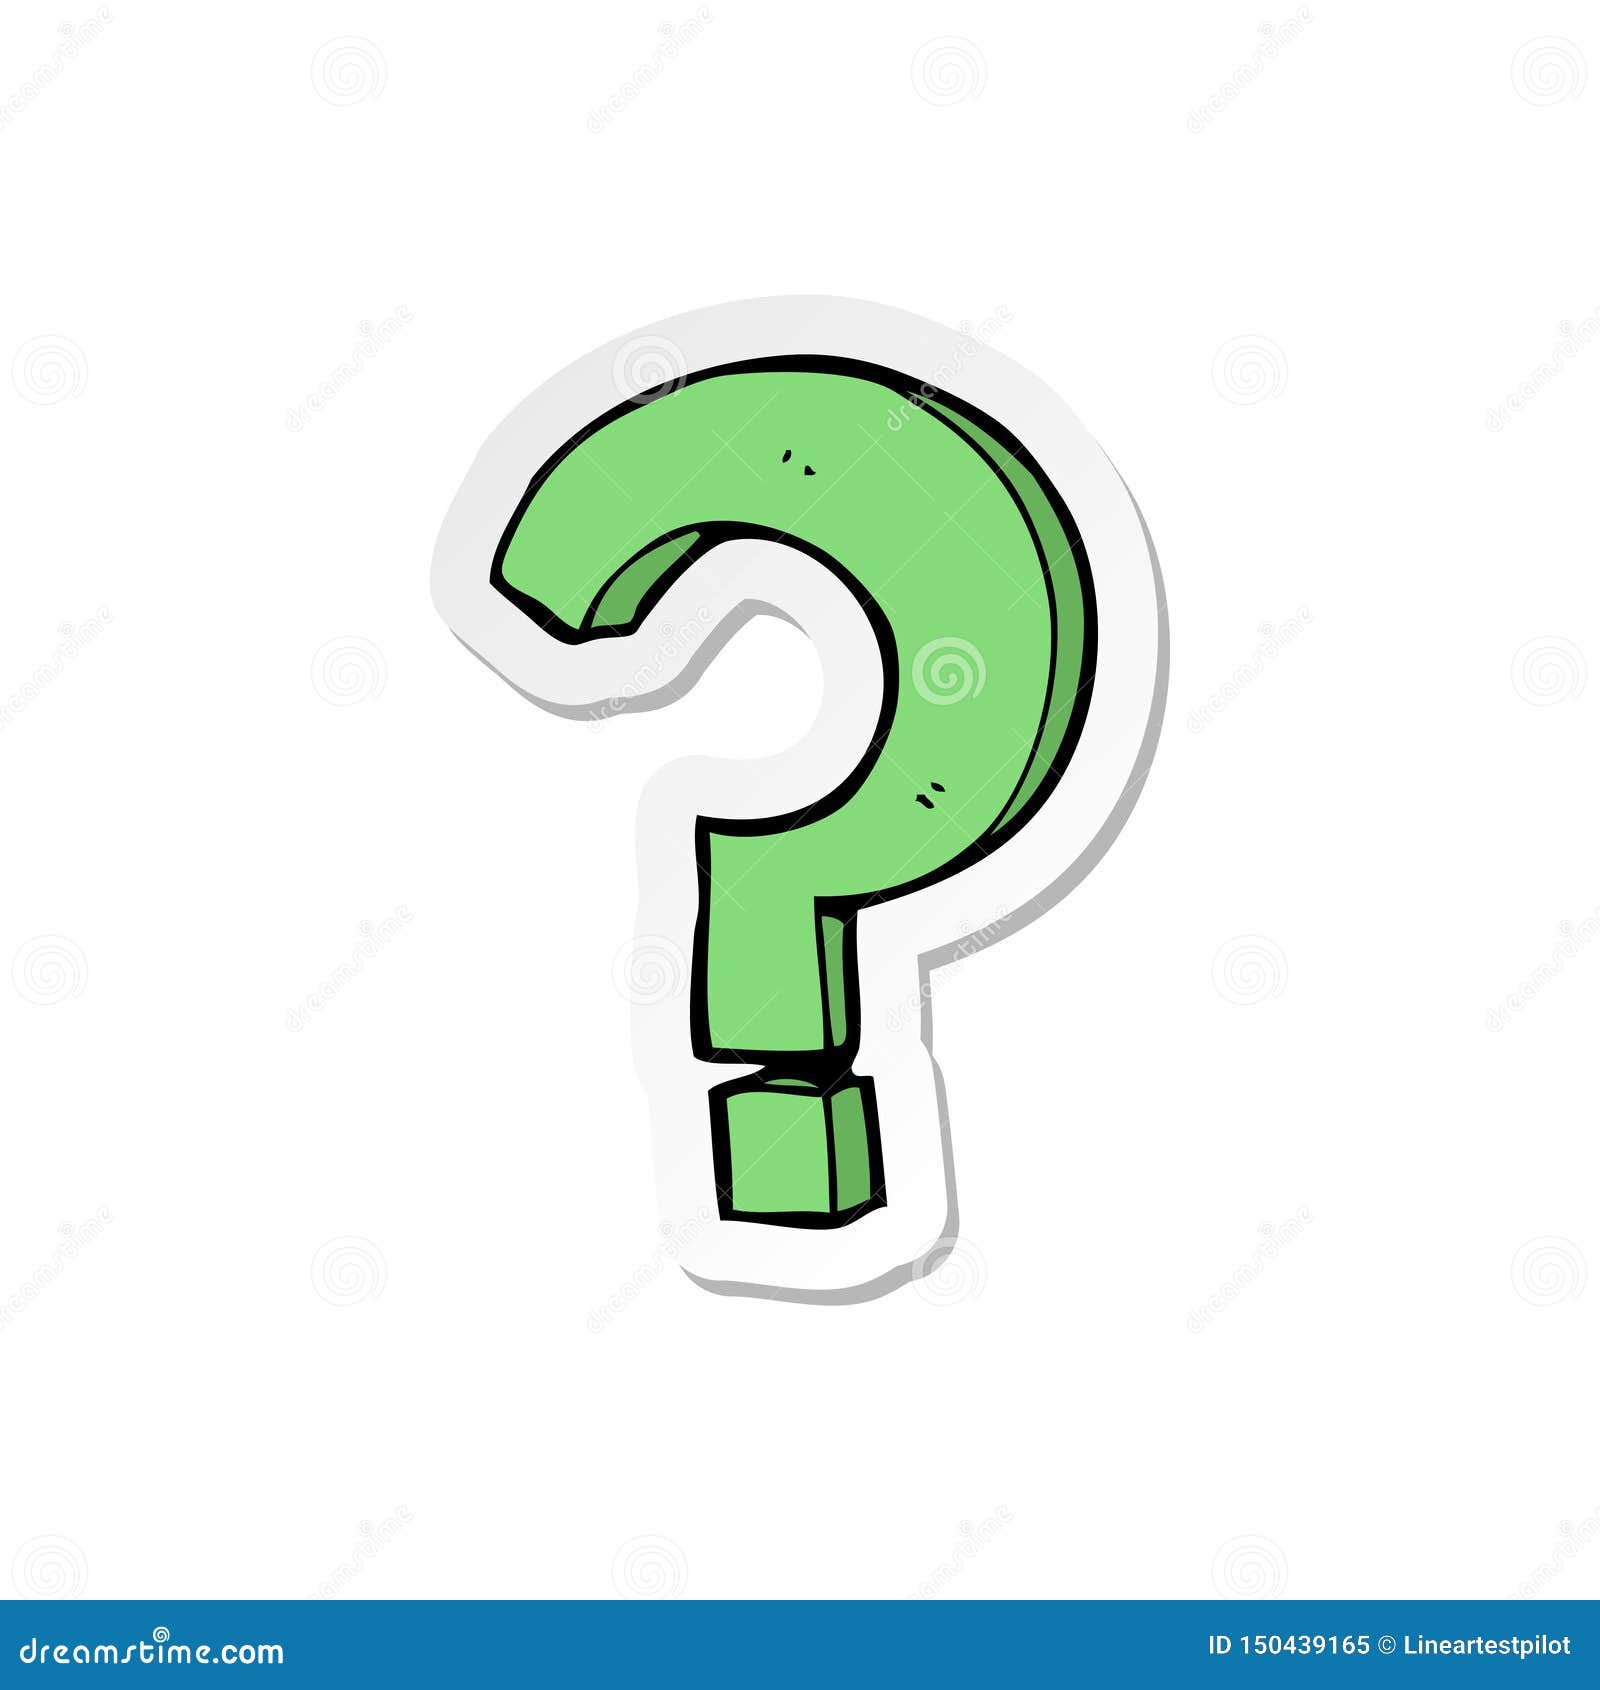 Sticker Of A Cartoon Question Mark Stock Vector Illustration Of Quirky Sticker 150439165